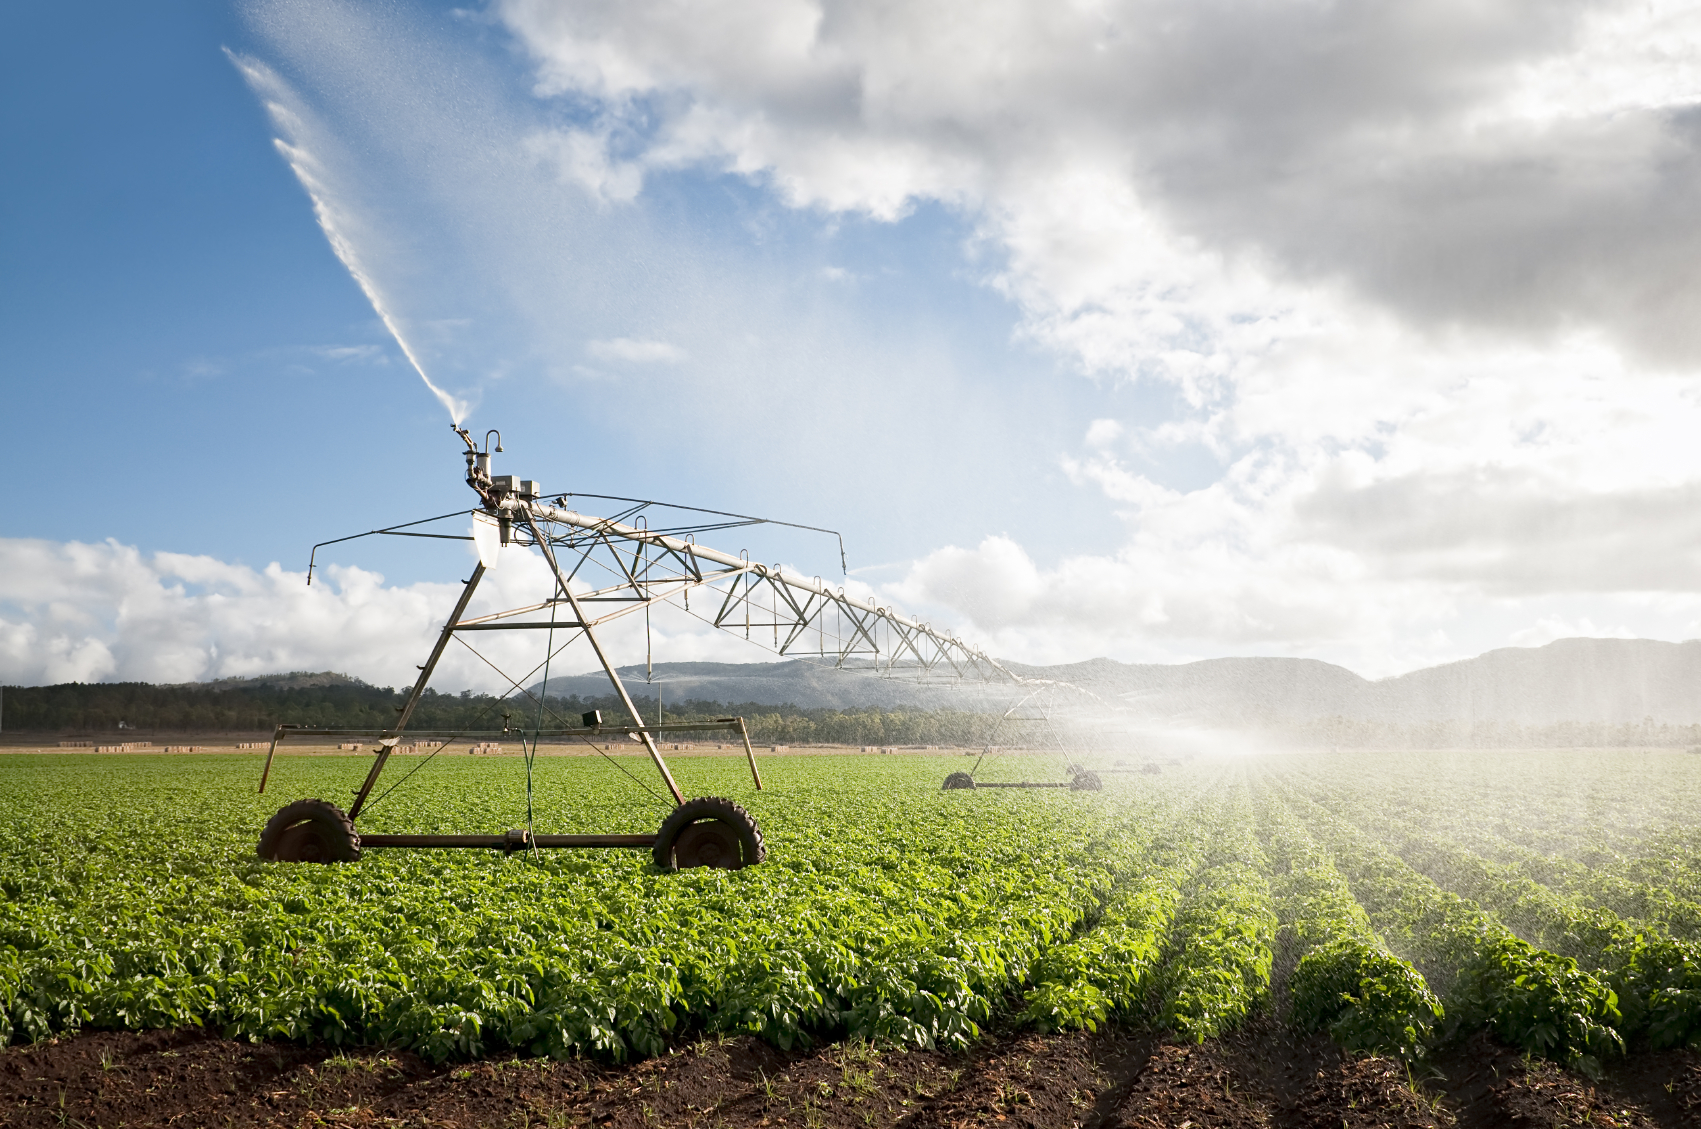 A recent NFU survey found that farmers are using water more wisely